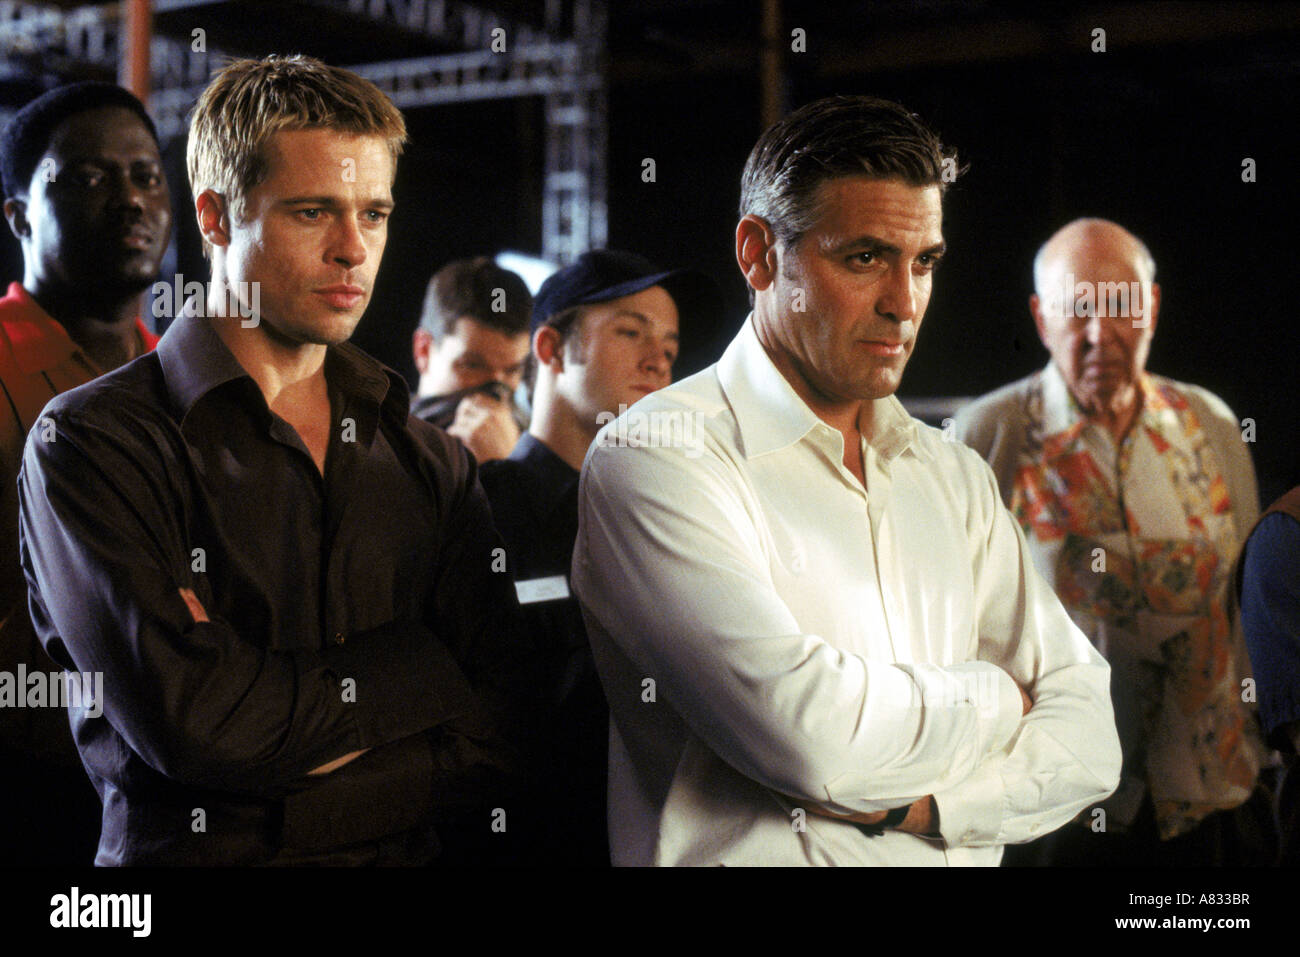 OCEANS 11 - George Clooney (at right) and Bradf Pitt  on set of  2001 Warner film Stock Photo